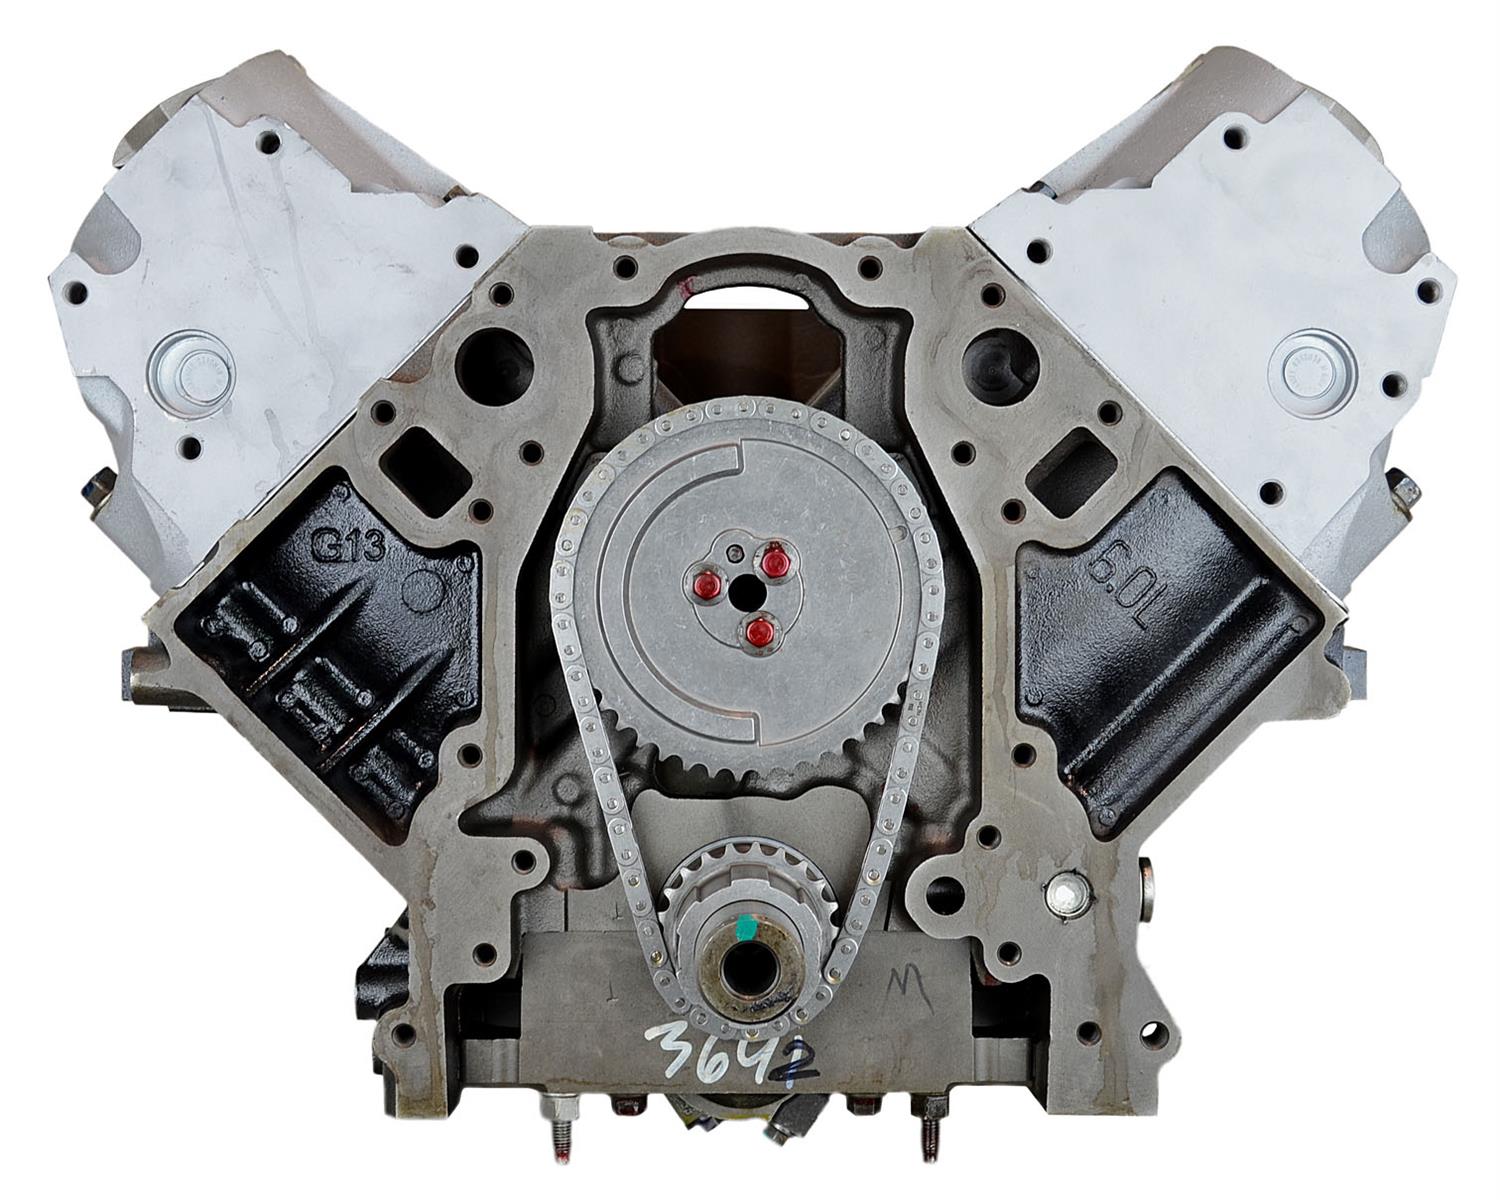 Remanufactured Crate Engine for 2002-2007 Cadillac/Chevy/GMC